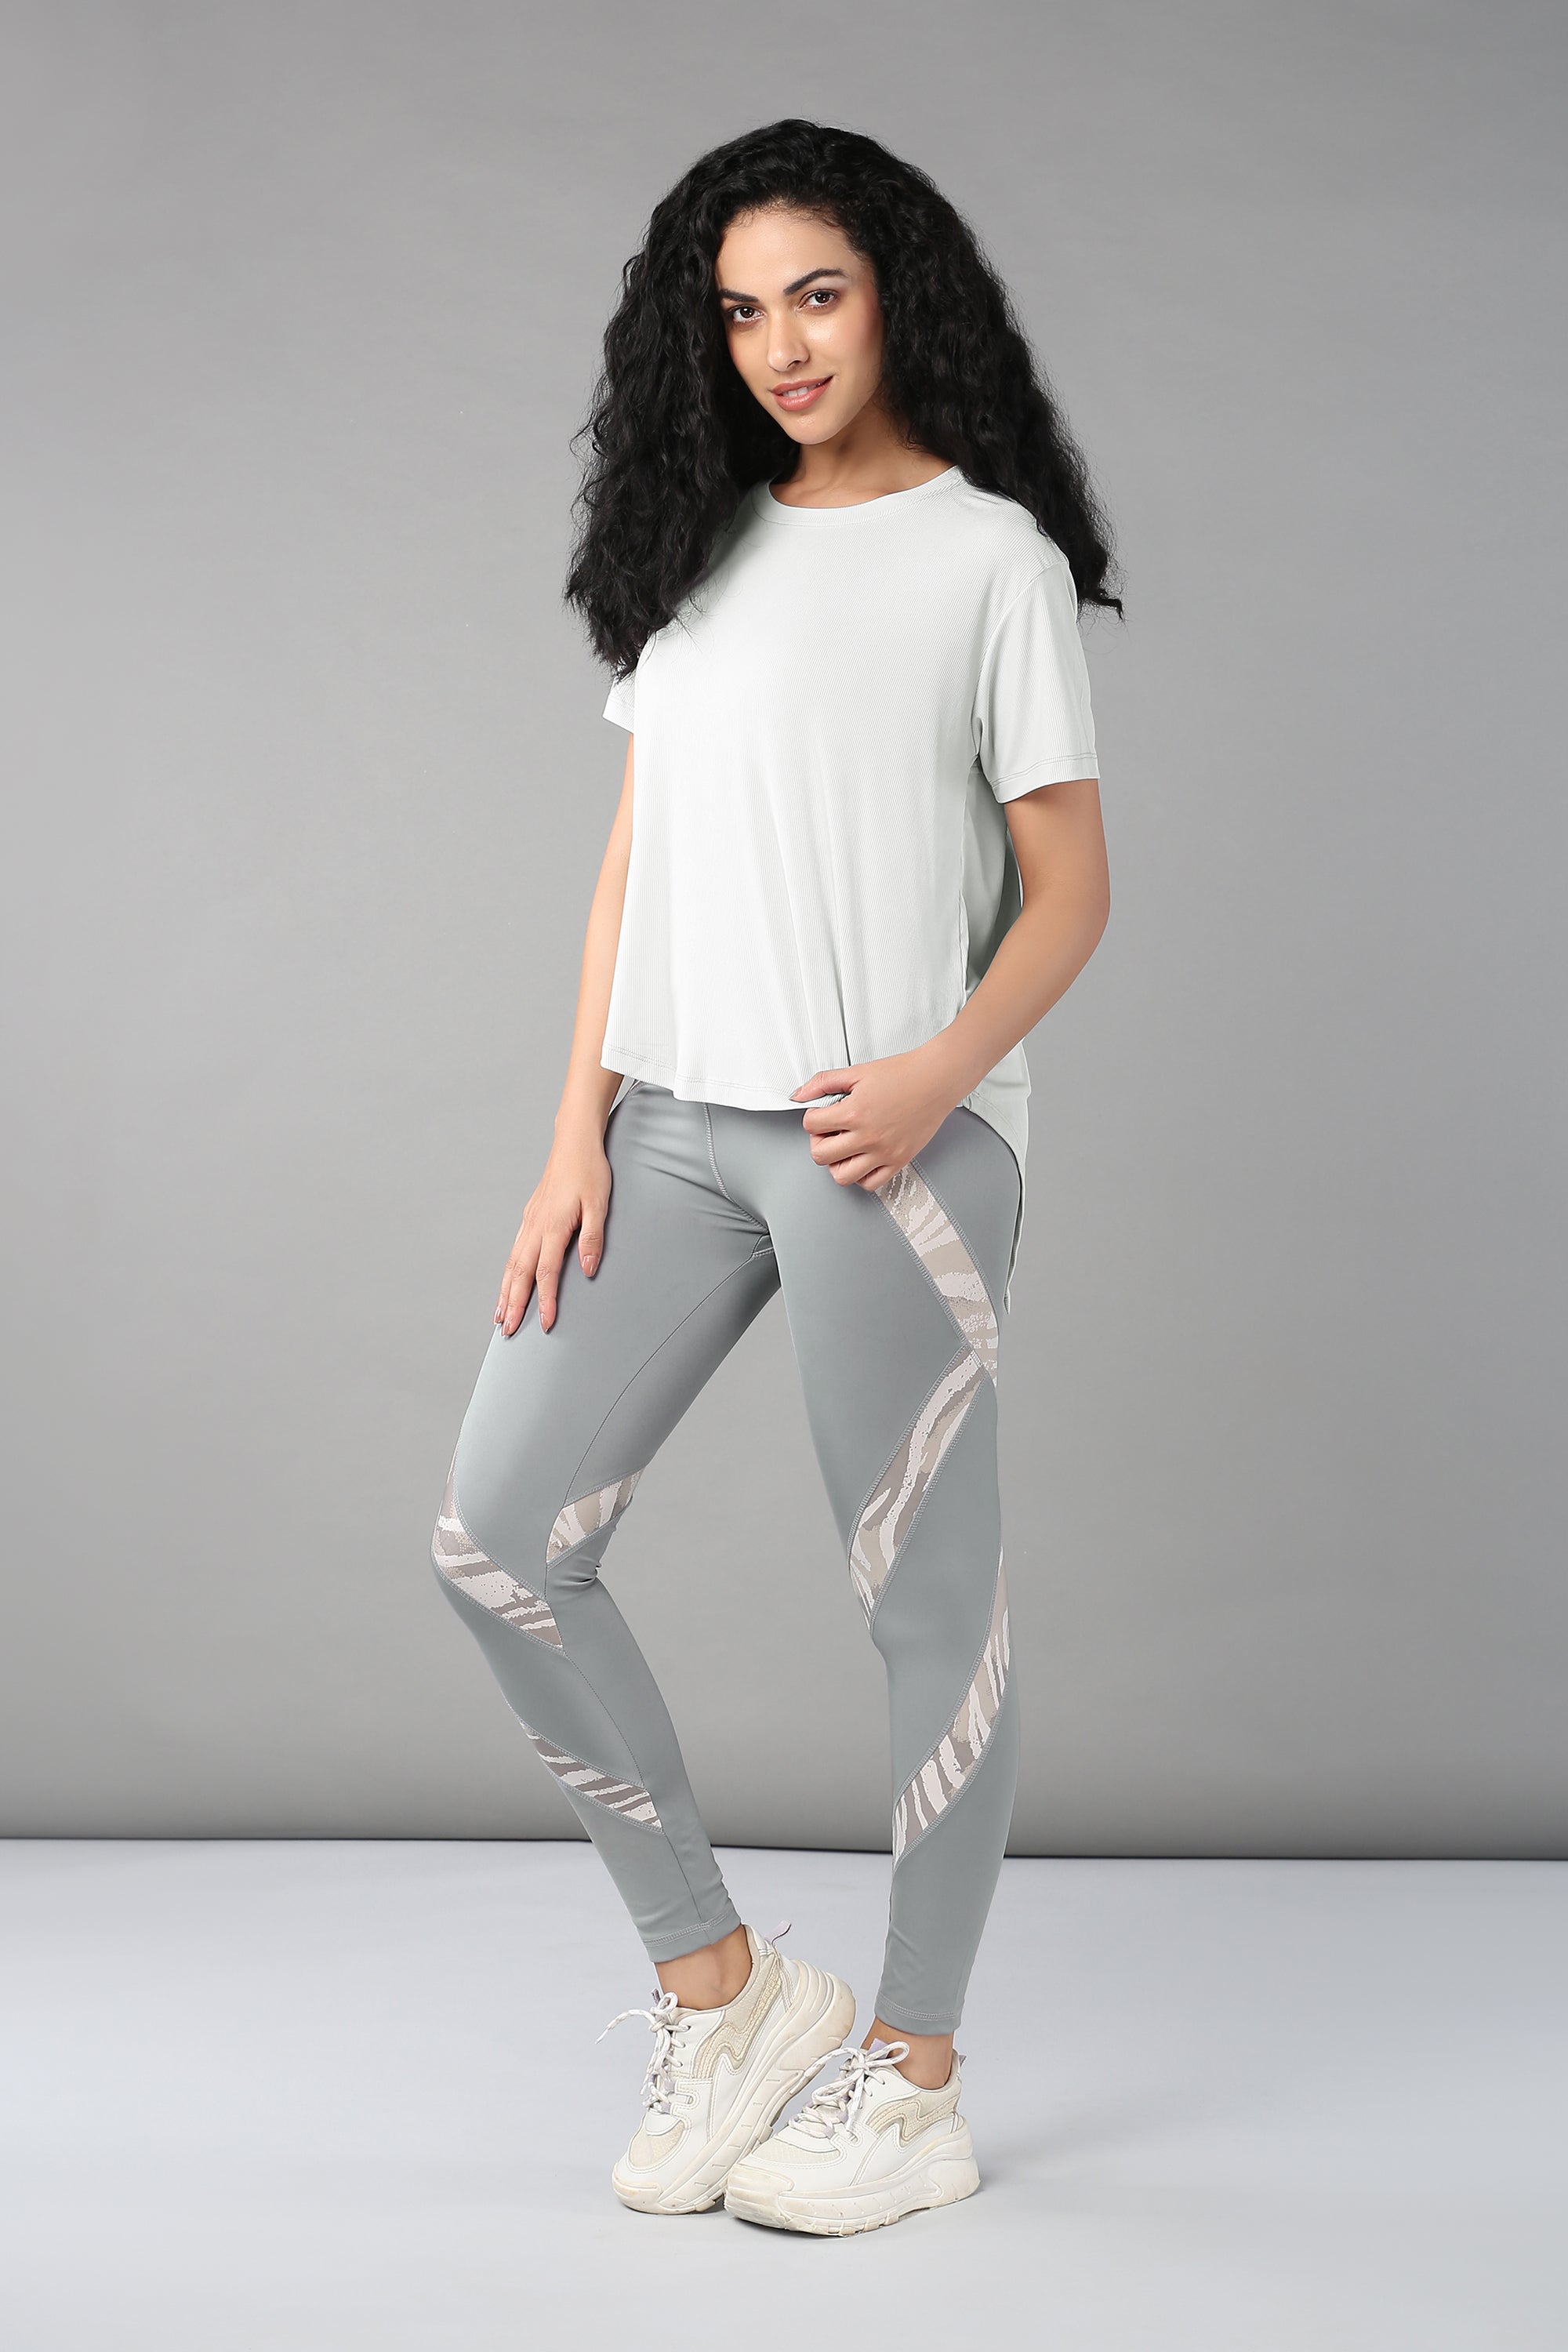 Grey Top with Patched Legging